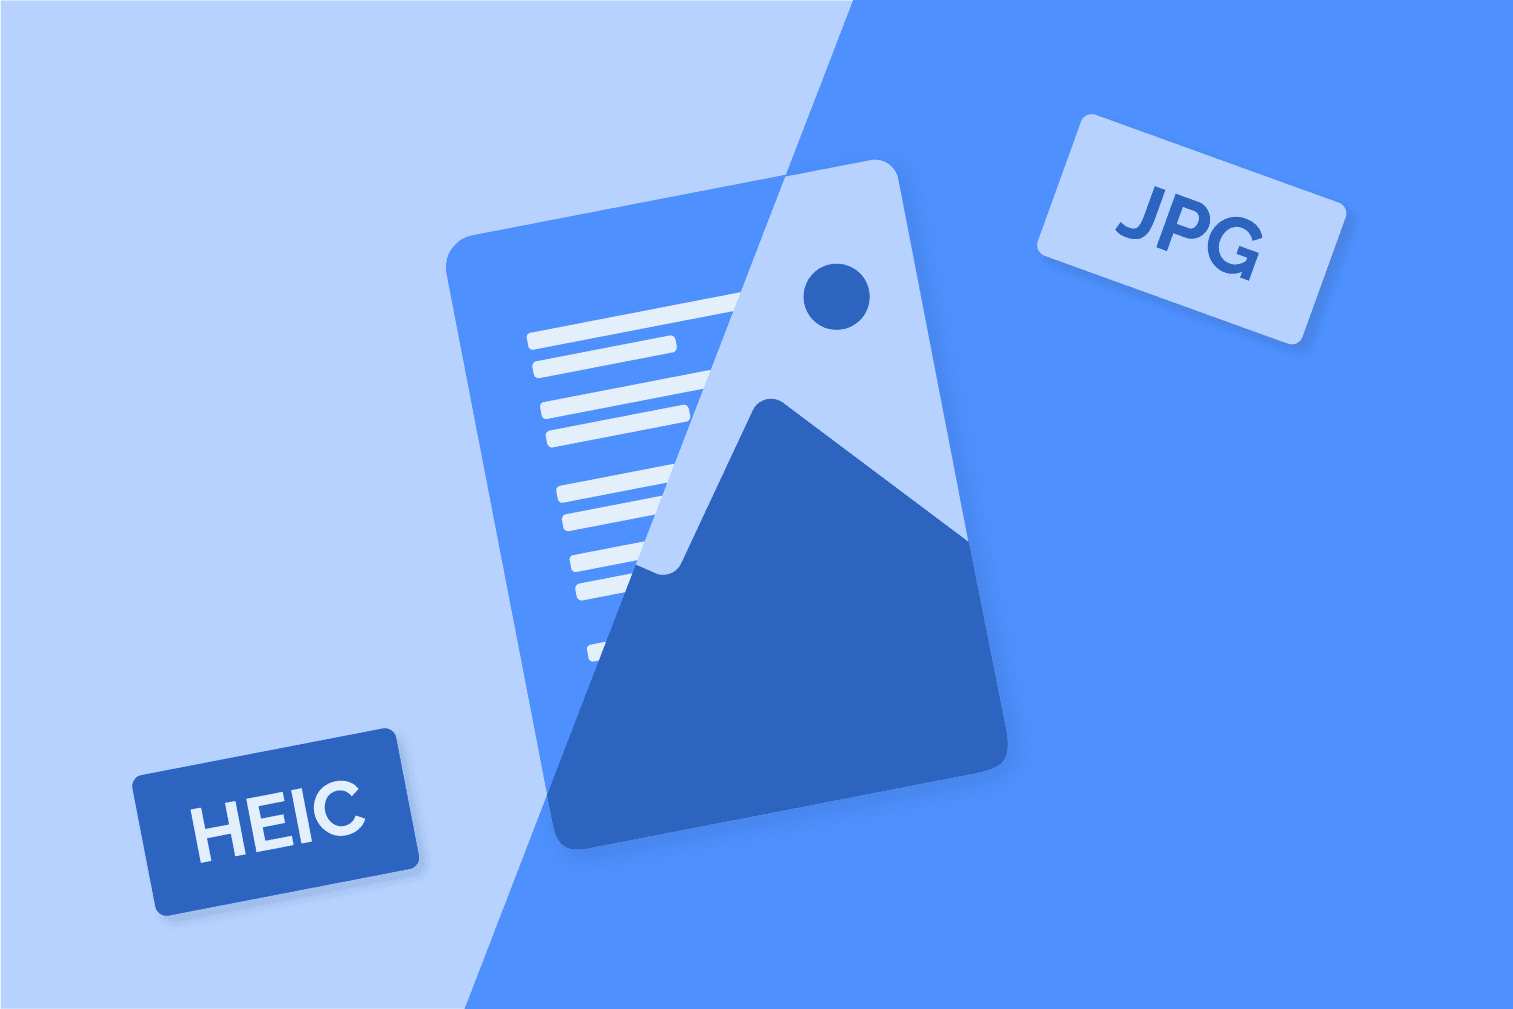 How to convert HEIC to JPG